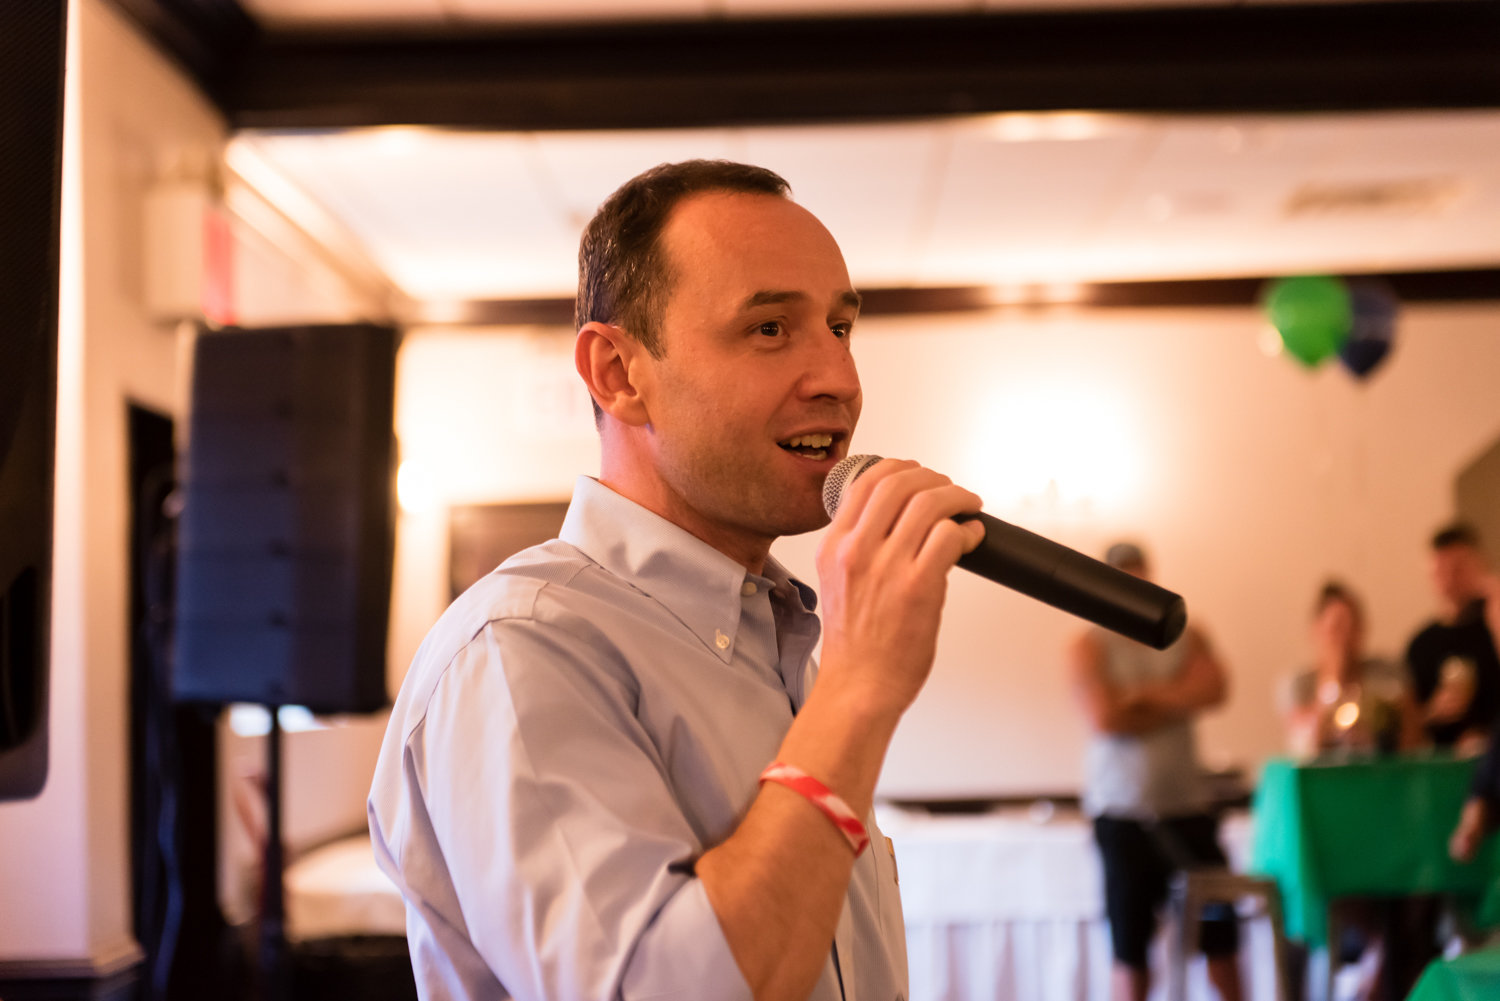 City council candidate Dan Padernacht conducts a trivia game during a campaign fundraising event at Downey’s Bar & Grill that drew some 40 supporters in July. He wants to replace Councilman Andrew Cohen in 2021, and using the city’s public funds matching program to try and make it happen.